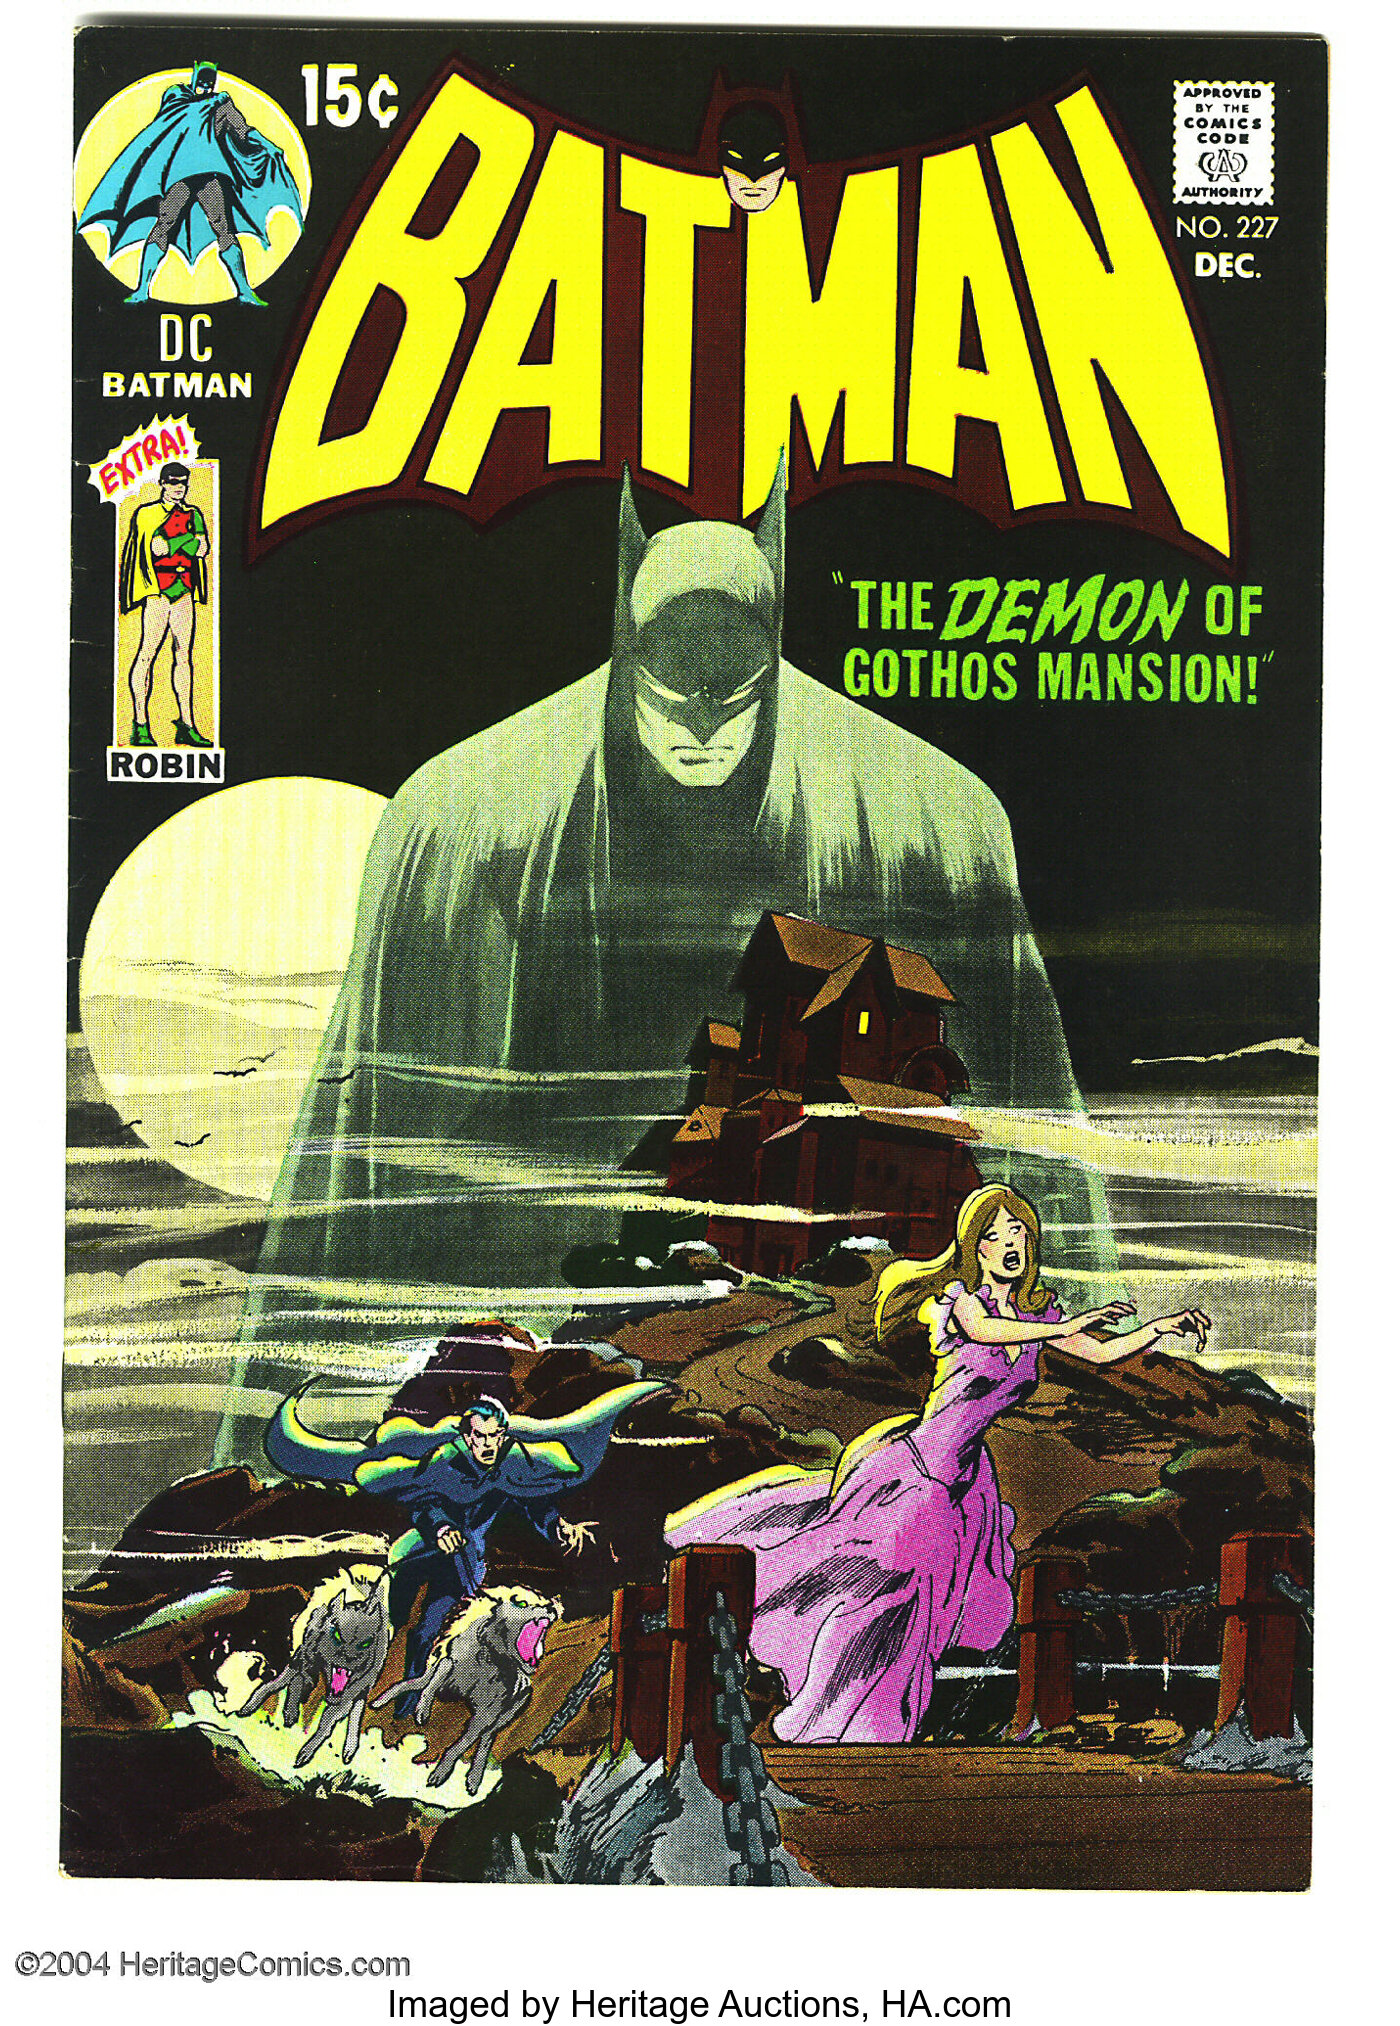 Batman #227 (DC, 1970) Condition: VF. Neal Adams cover, paying | Lot #17083  | Heritage Auctions